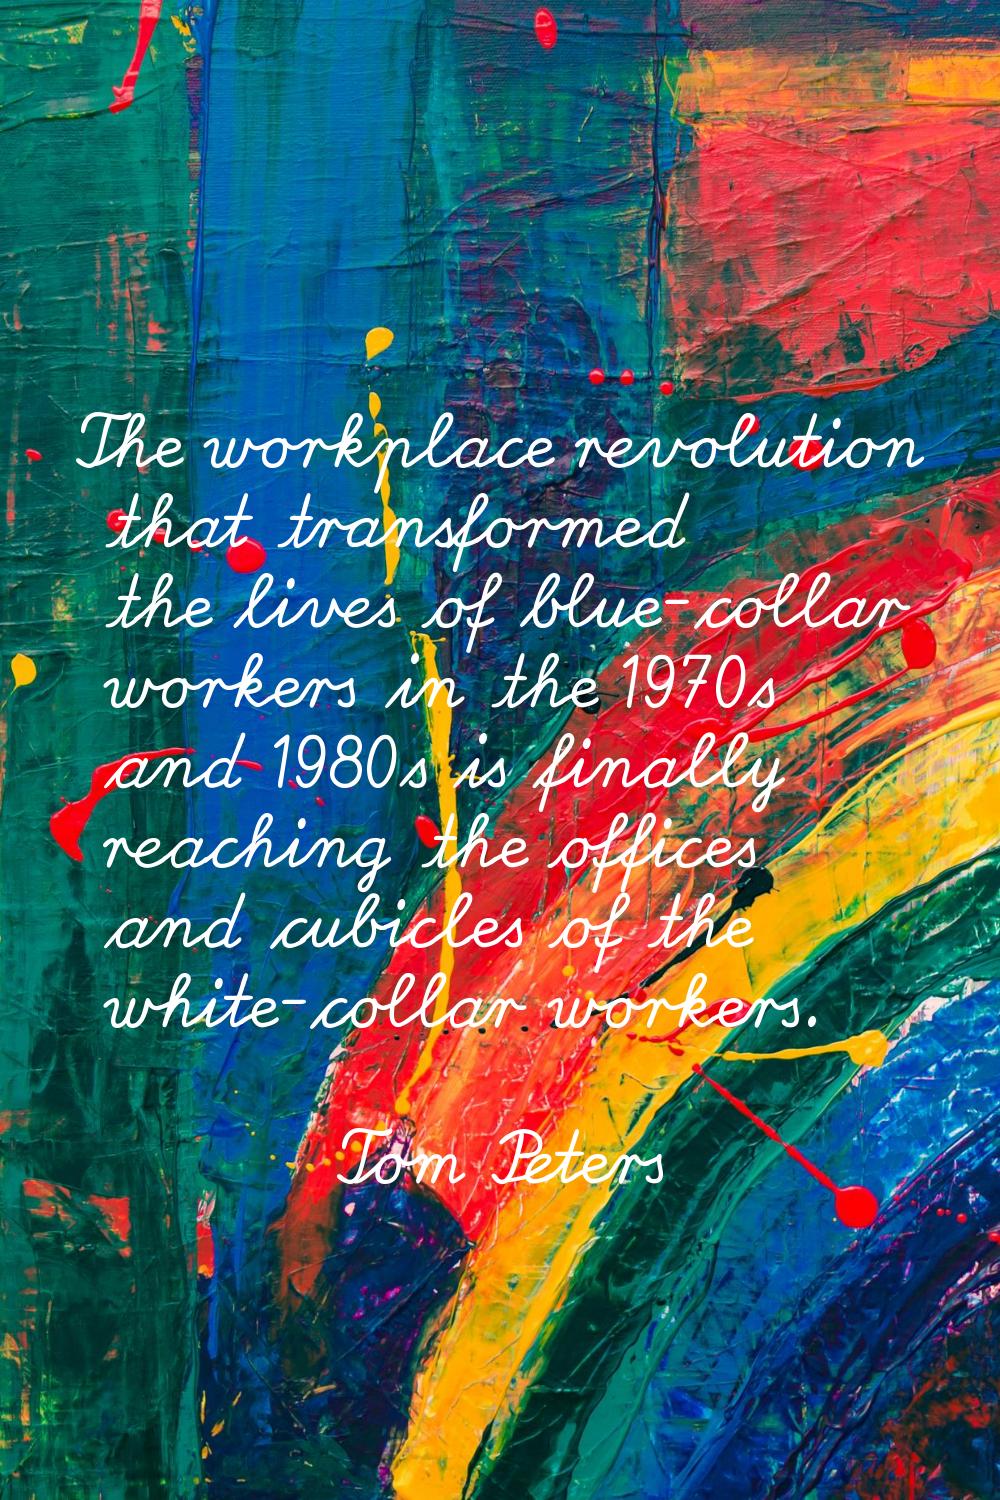 The workplace revolution that transformed the lives of blue-collar workers in the 1970s and 1980s i